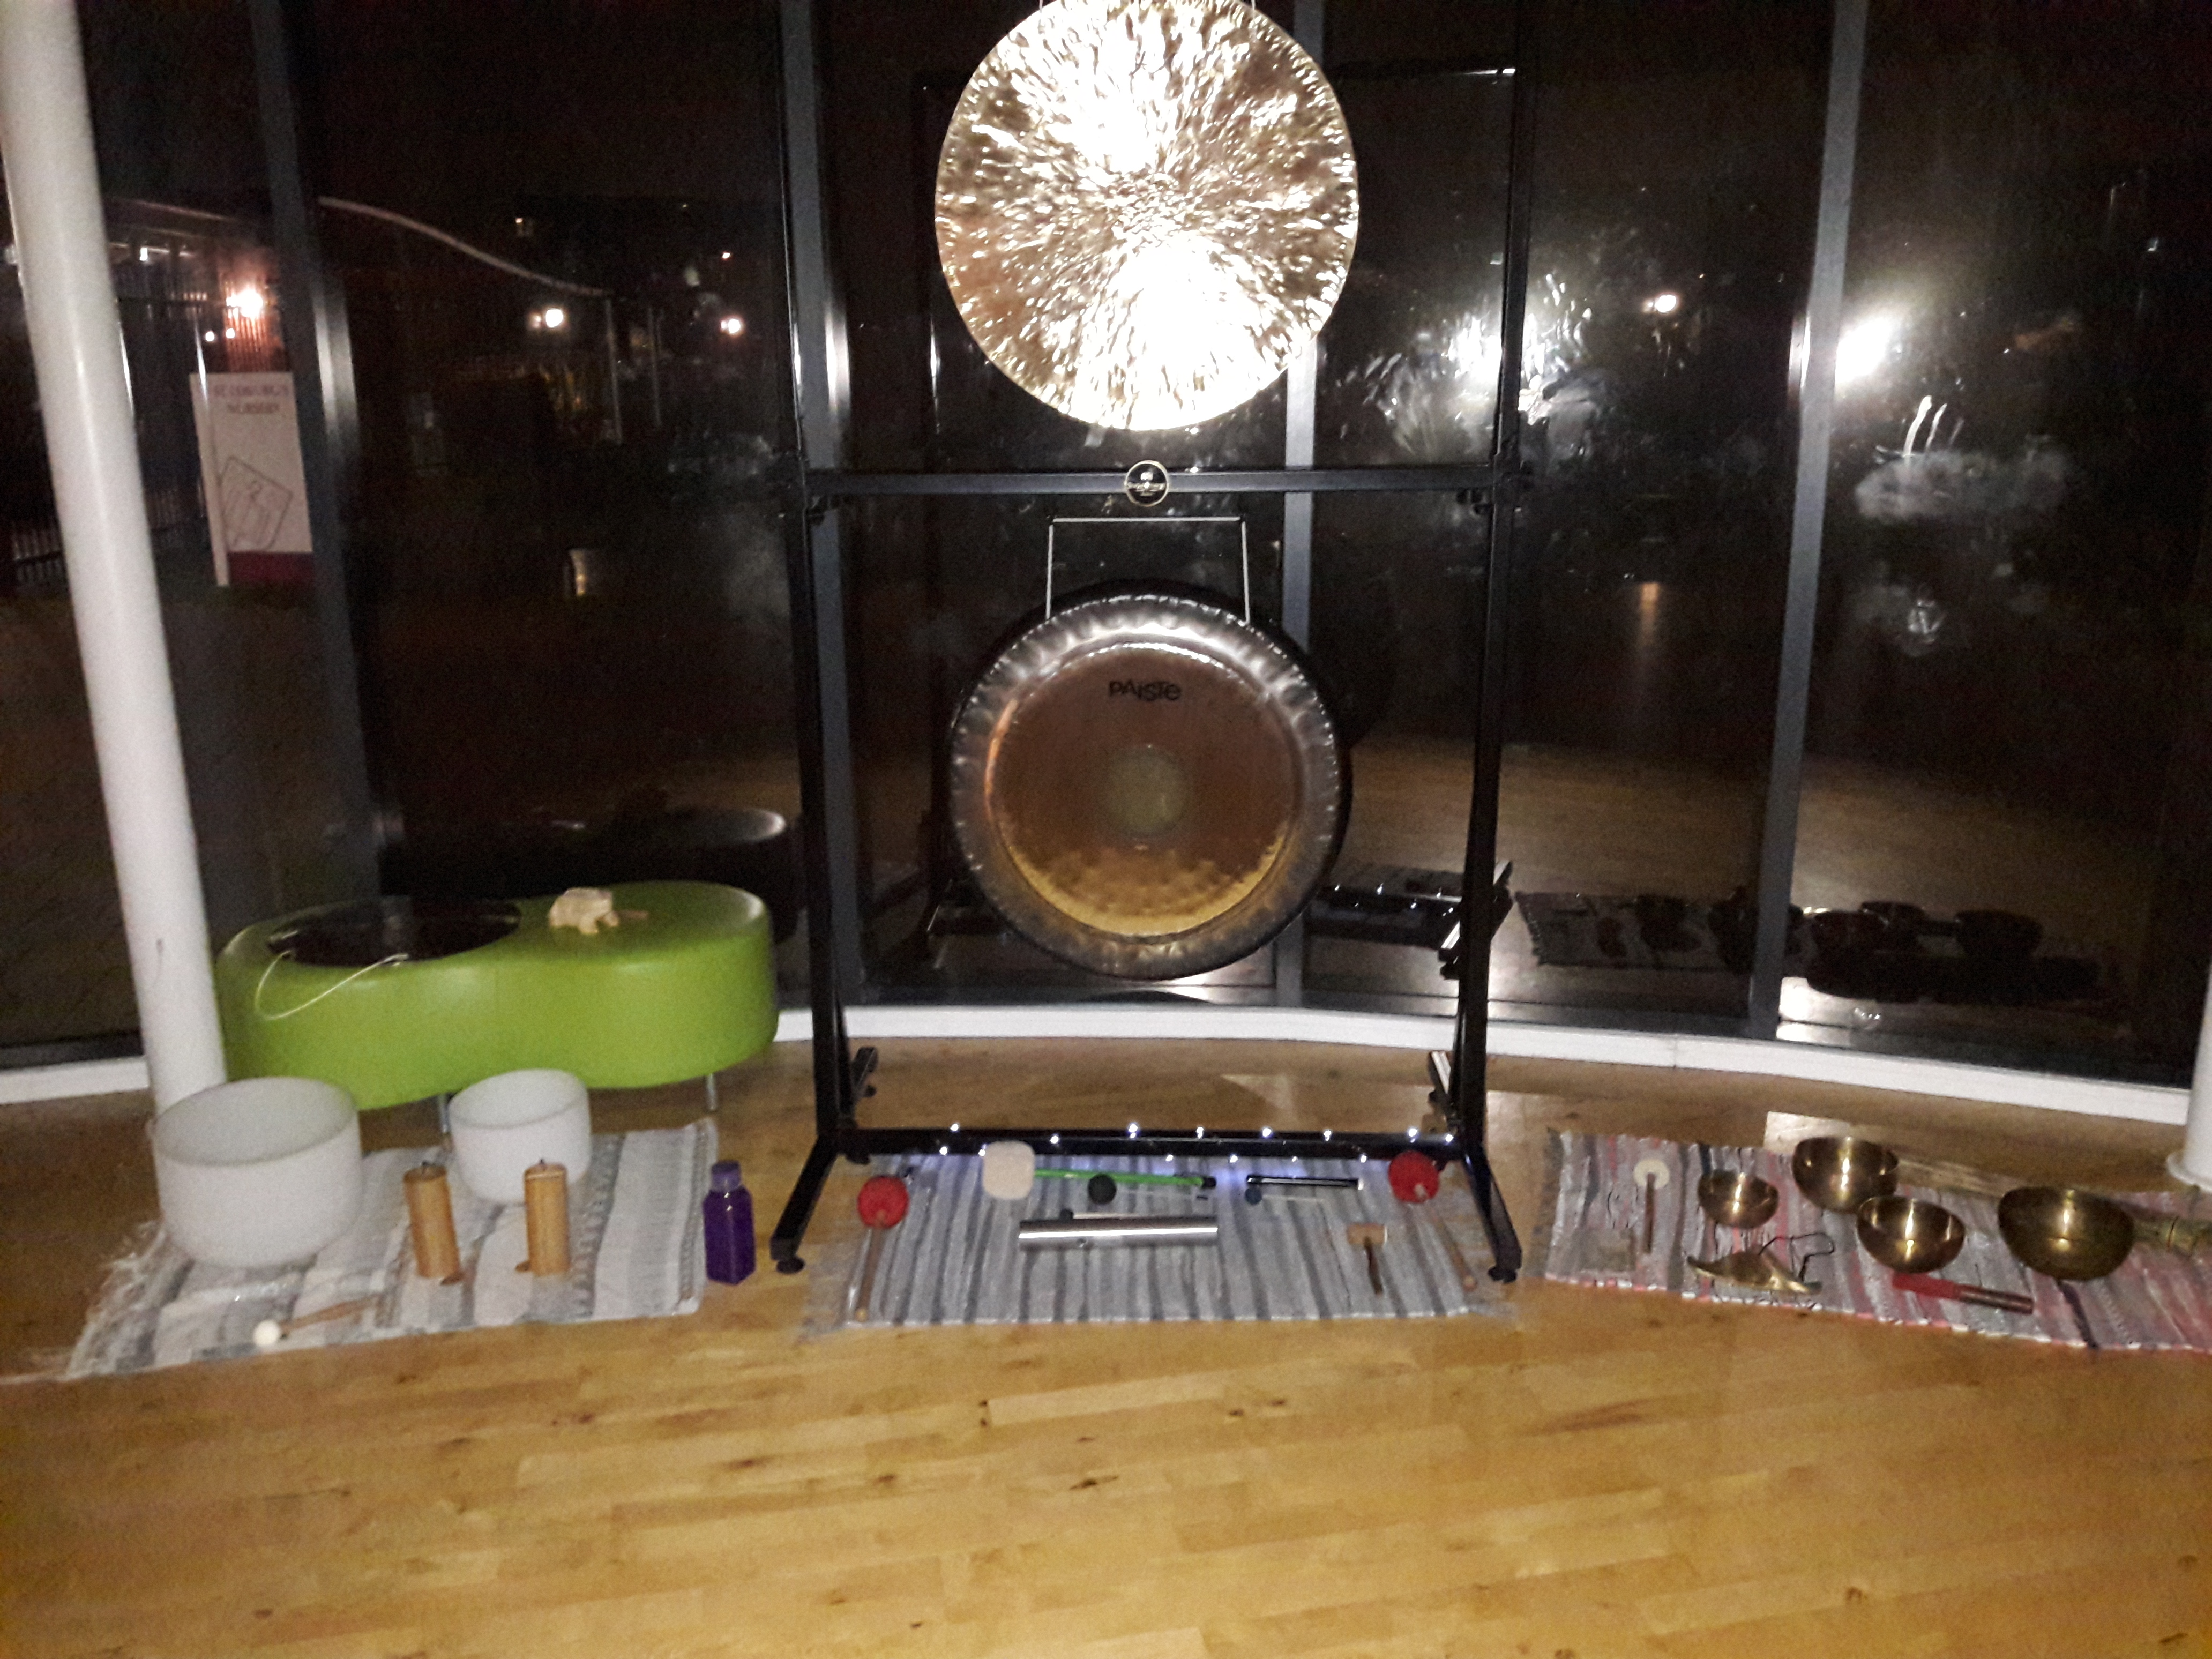 OXFORDSHIRE - Bicester - Gong Sound Bath